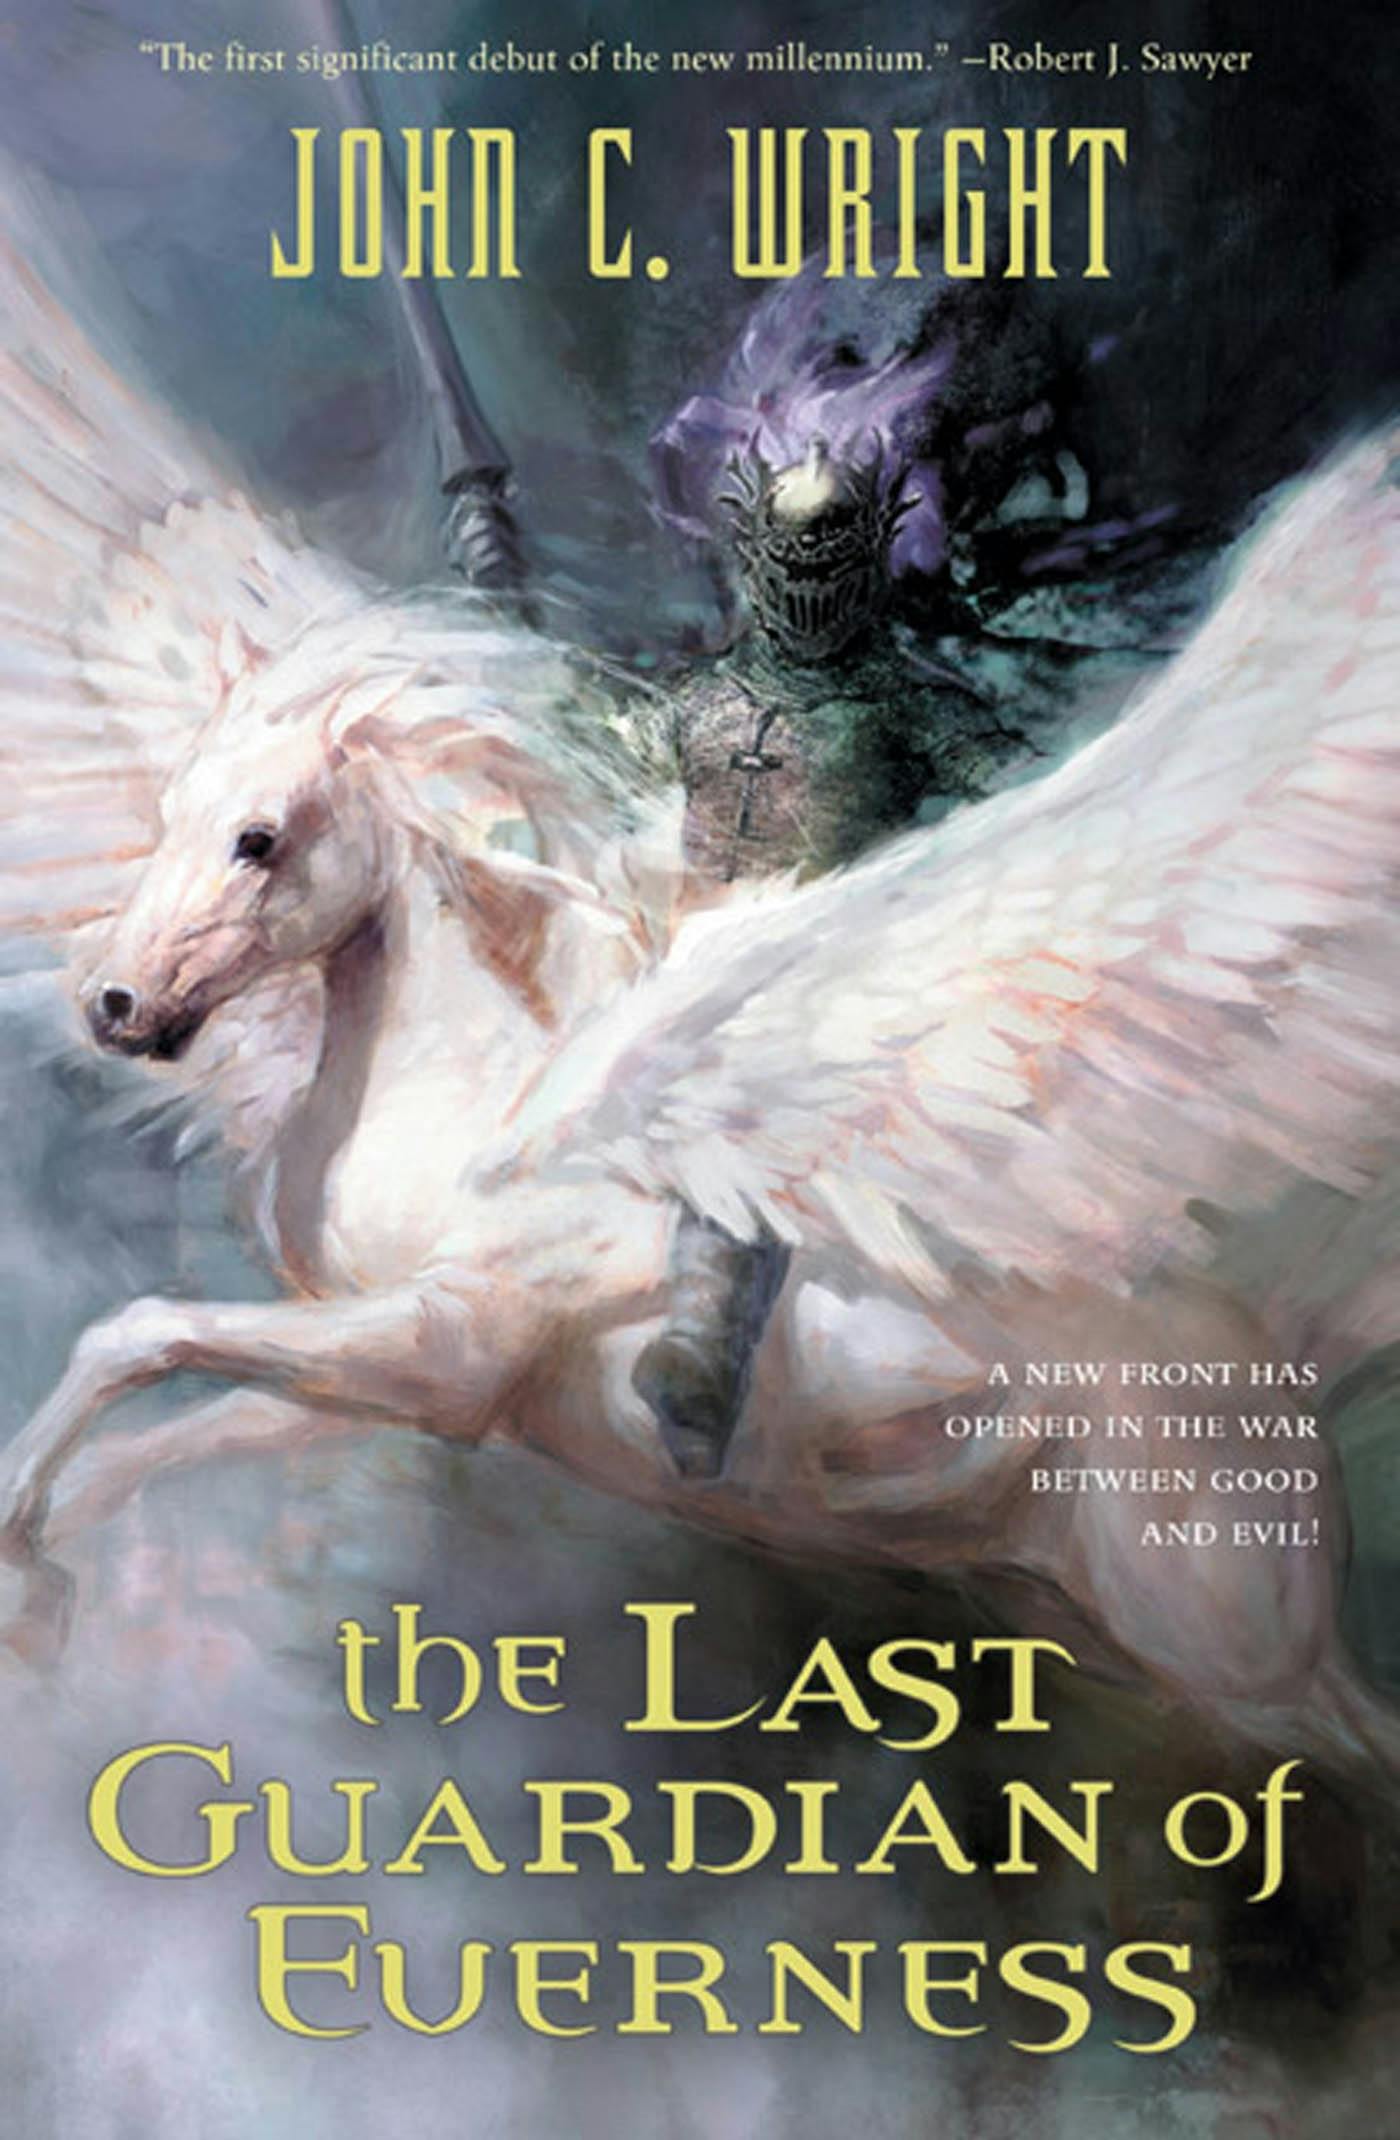 Cover for the book titled as: The Last Guardian of Everness